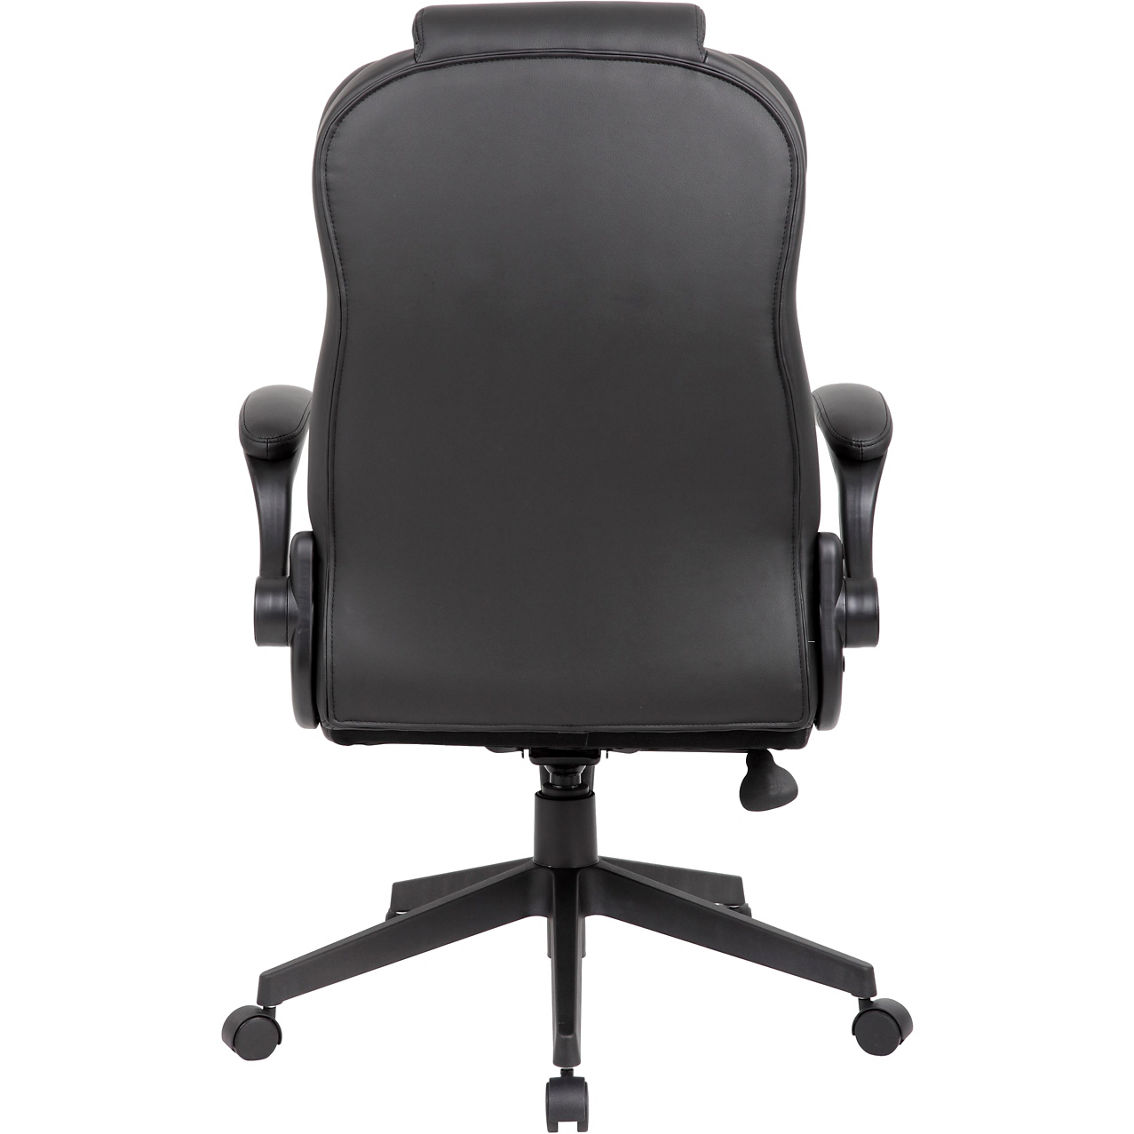 Presidential Seating Boss Executive High Back CaressoftPlus Flip Arm Chair - Image 2 of 4